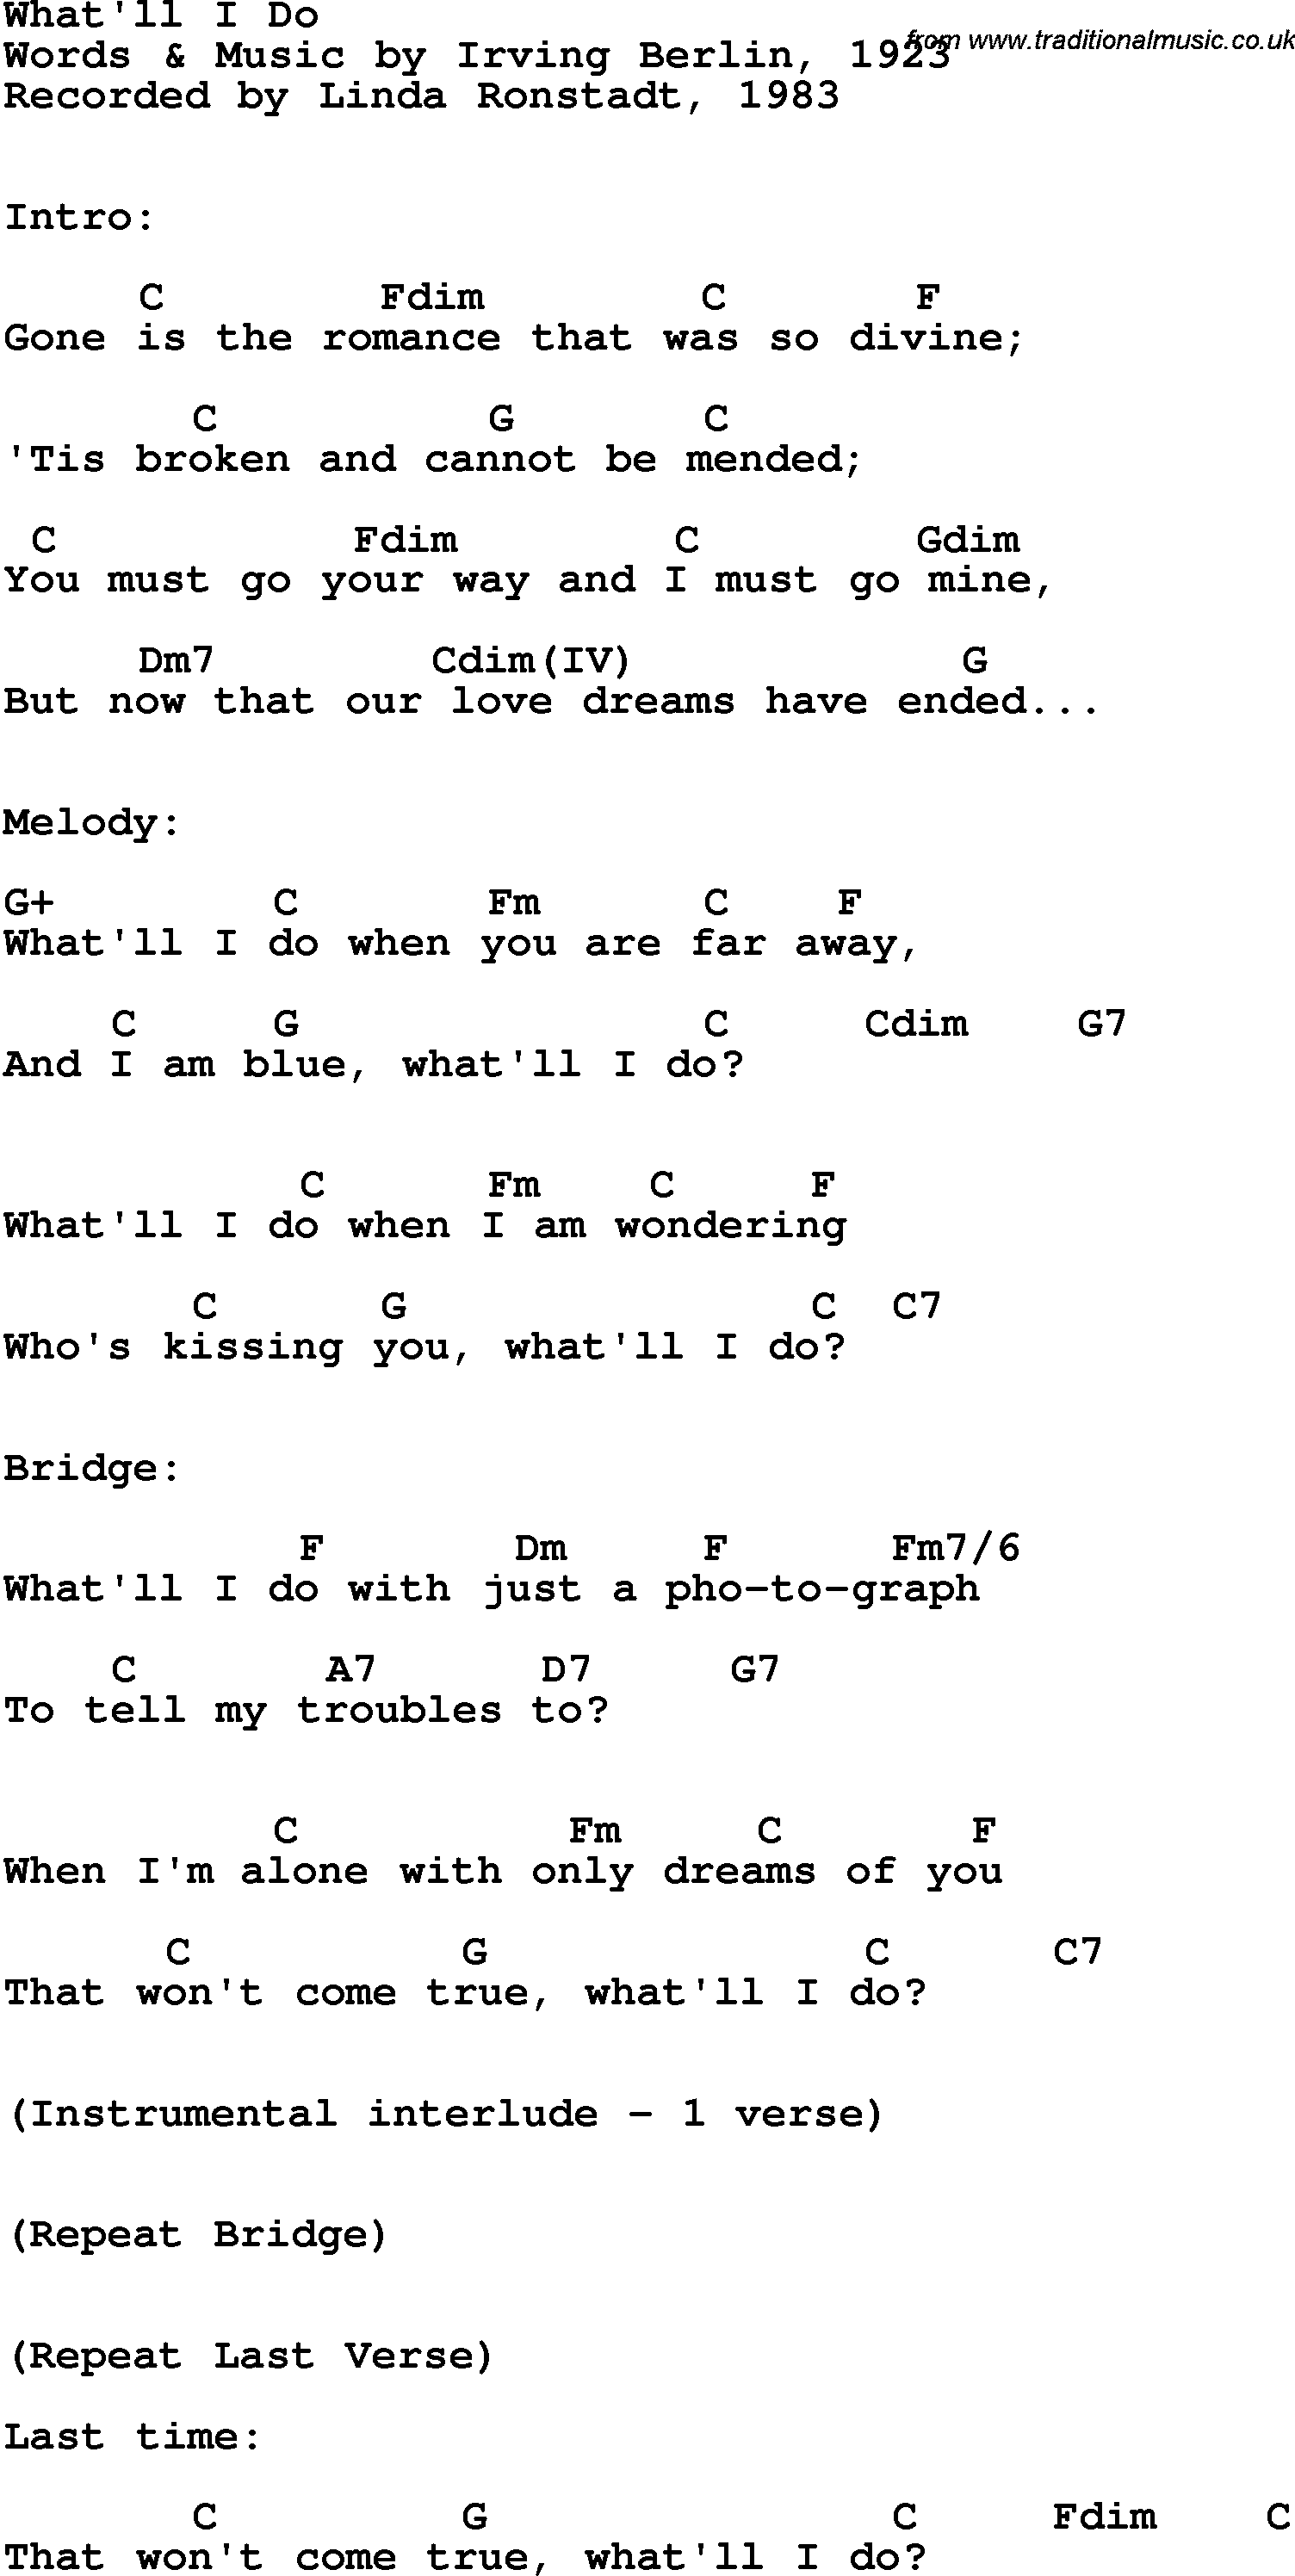 Song Lyrics with guitar chords for What'll I Do - Linda Ronstadt, 1983